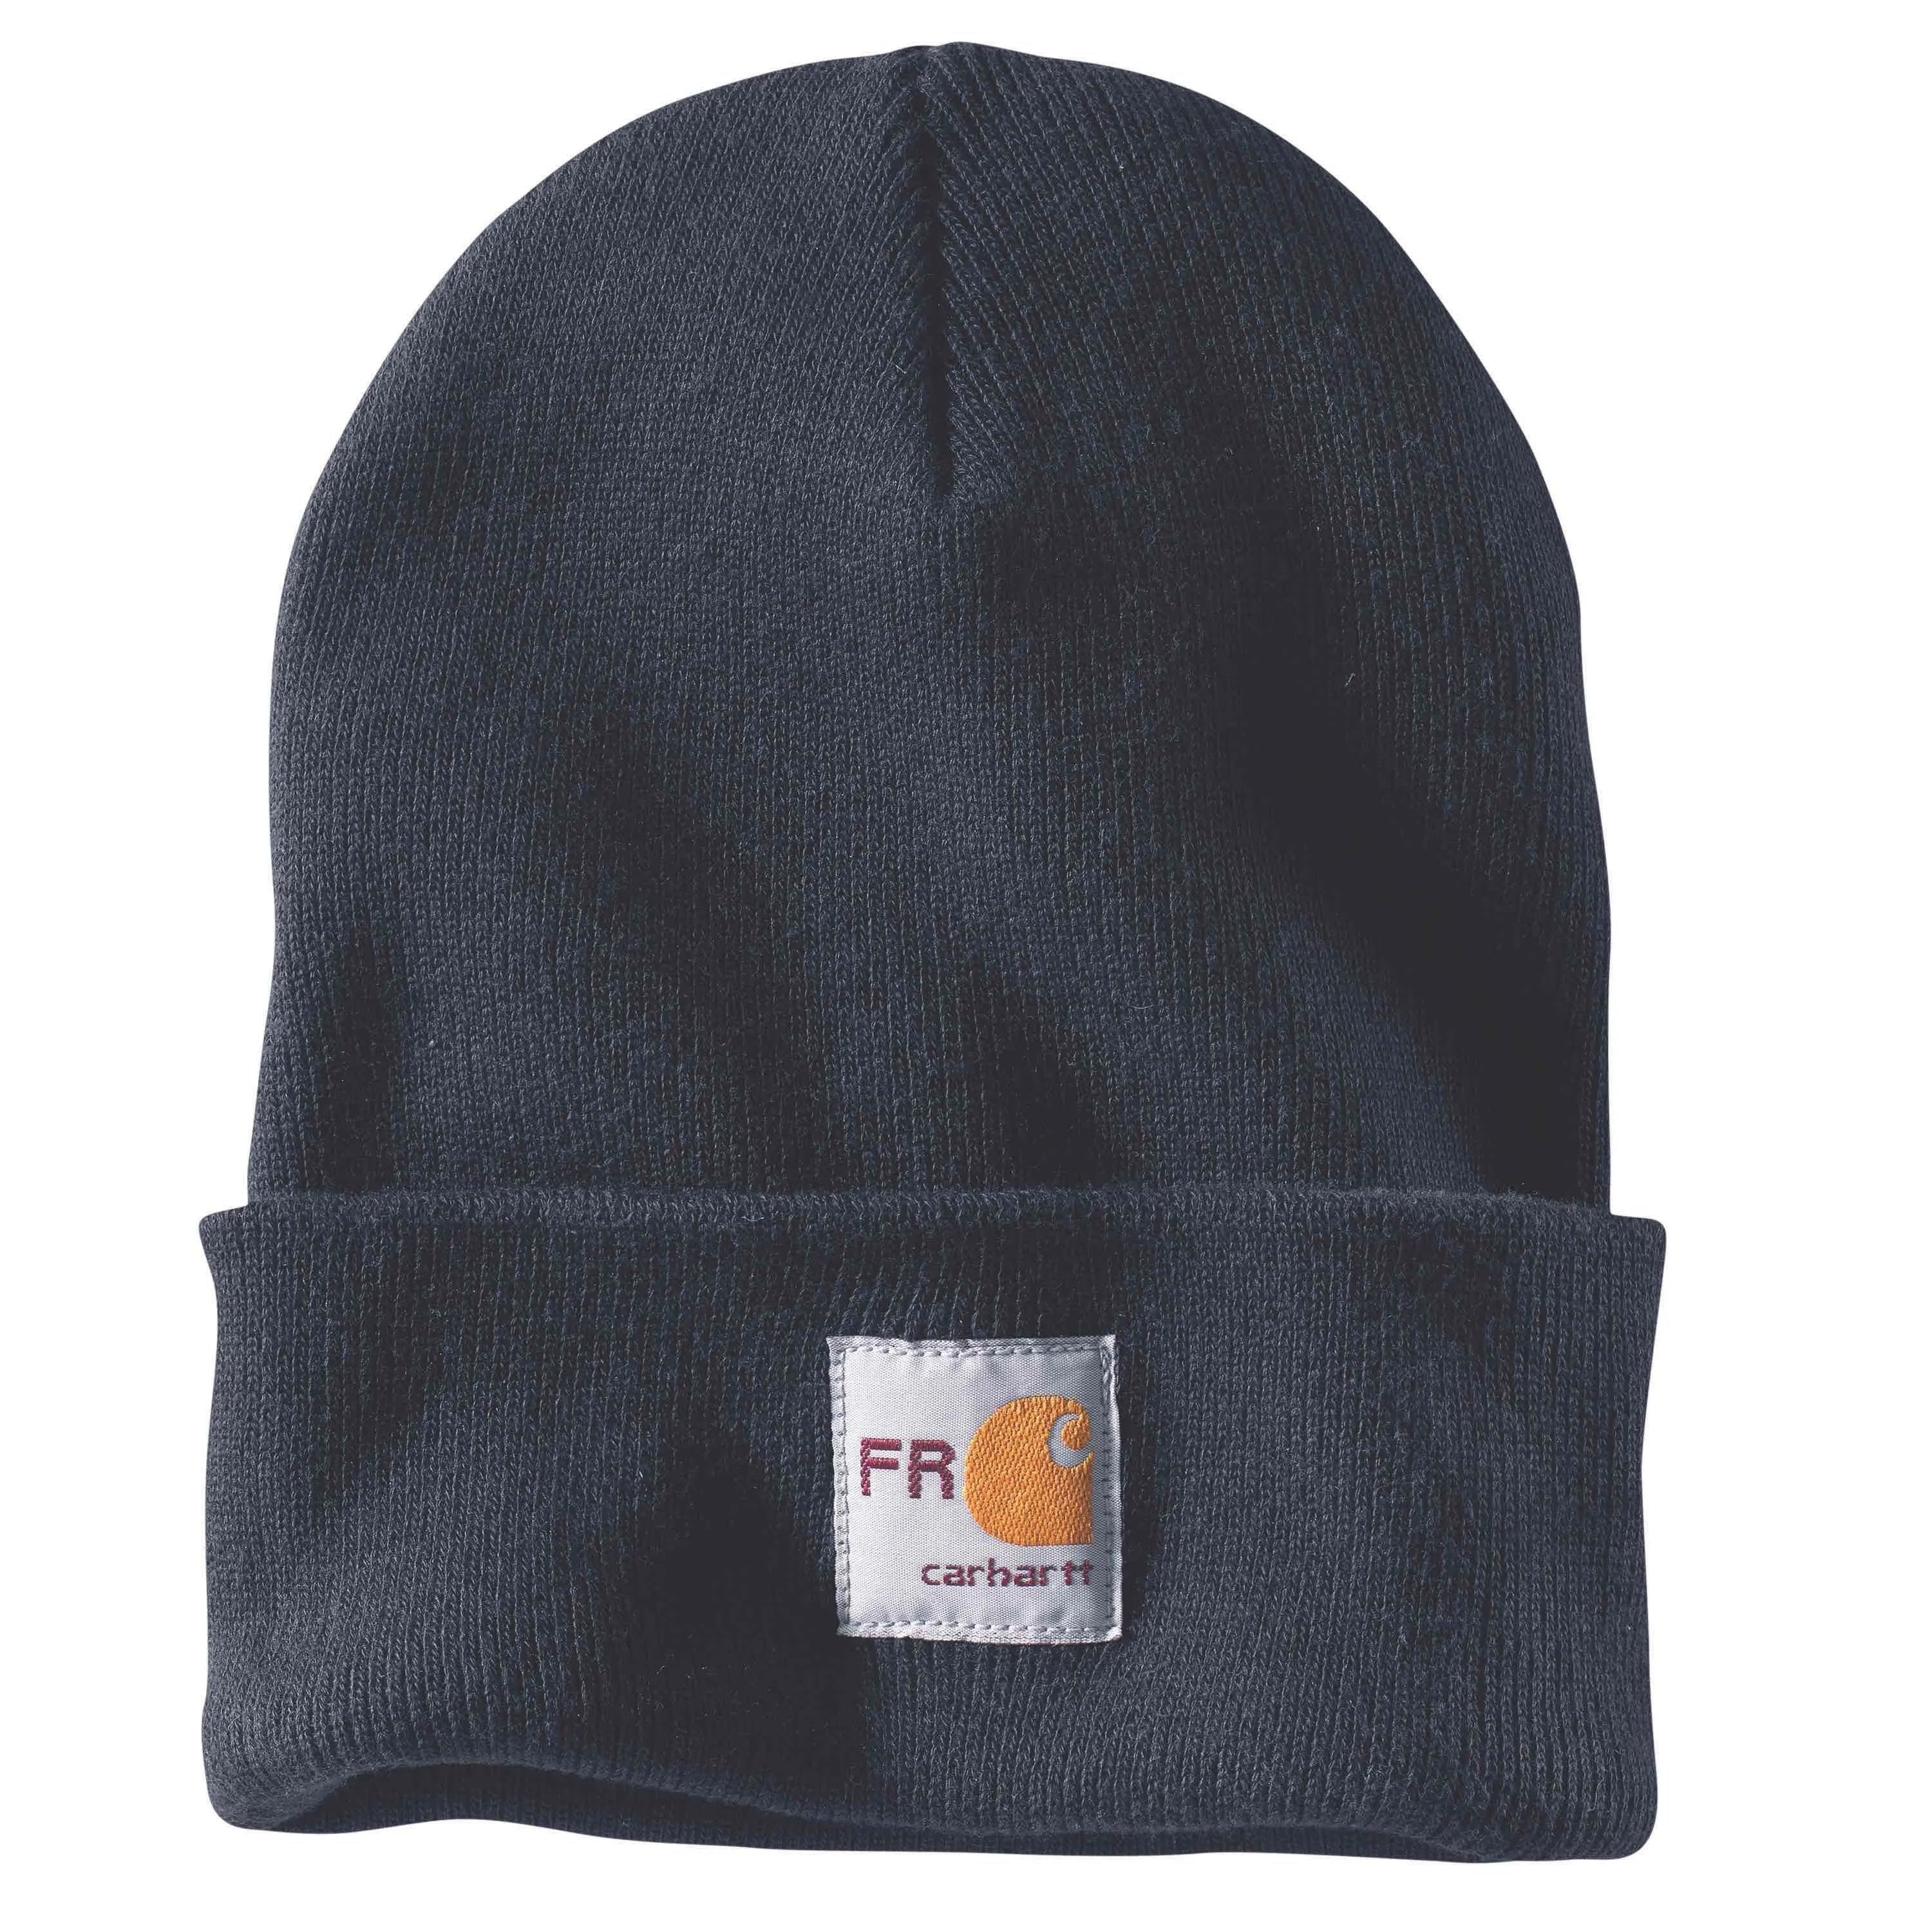 CARHARTT - FR Knit Watch Hat - Becker Safety and Supply